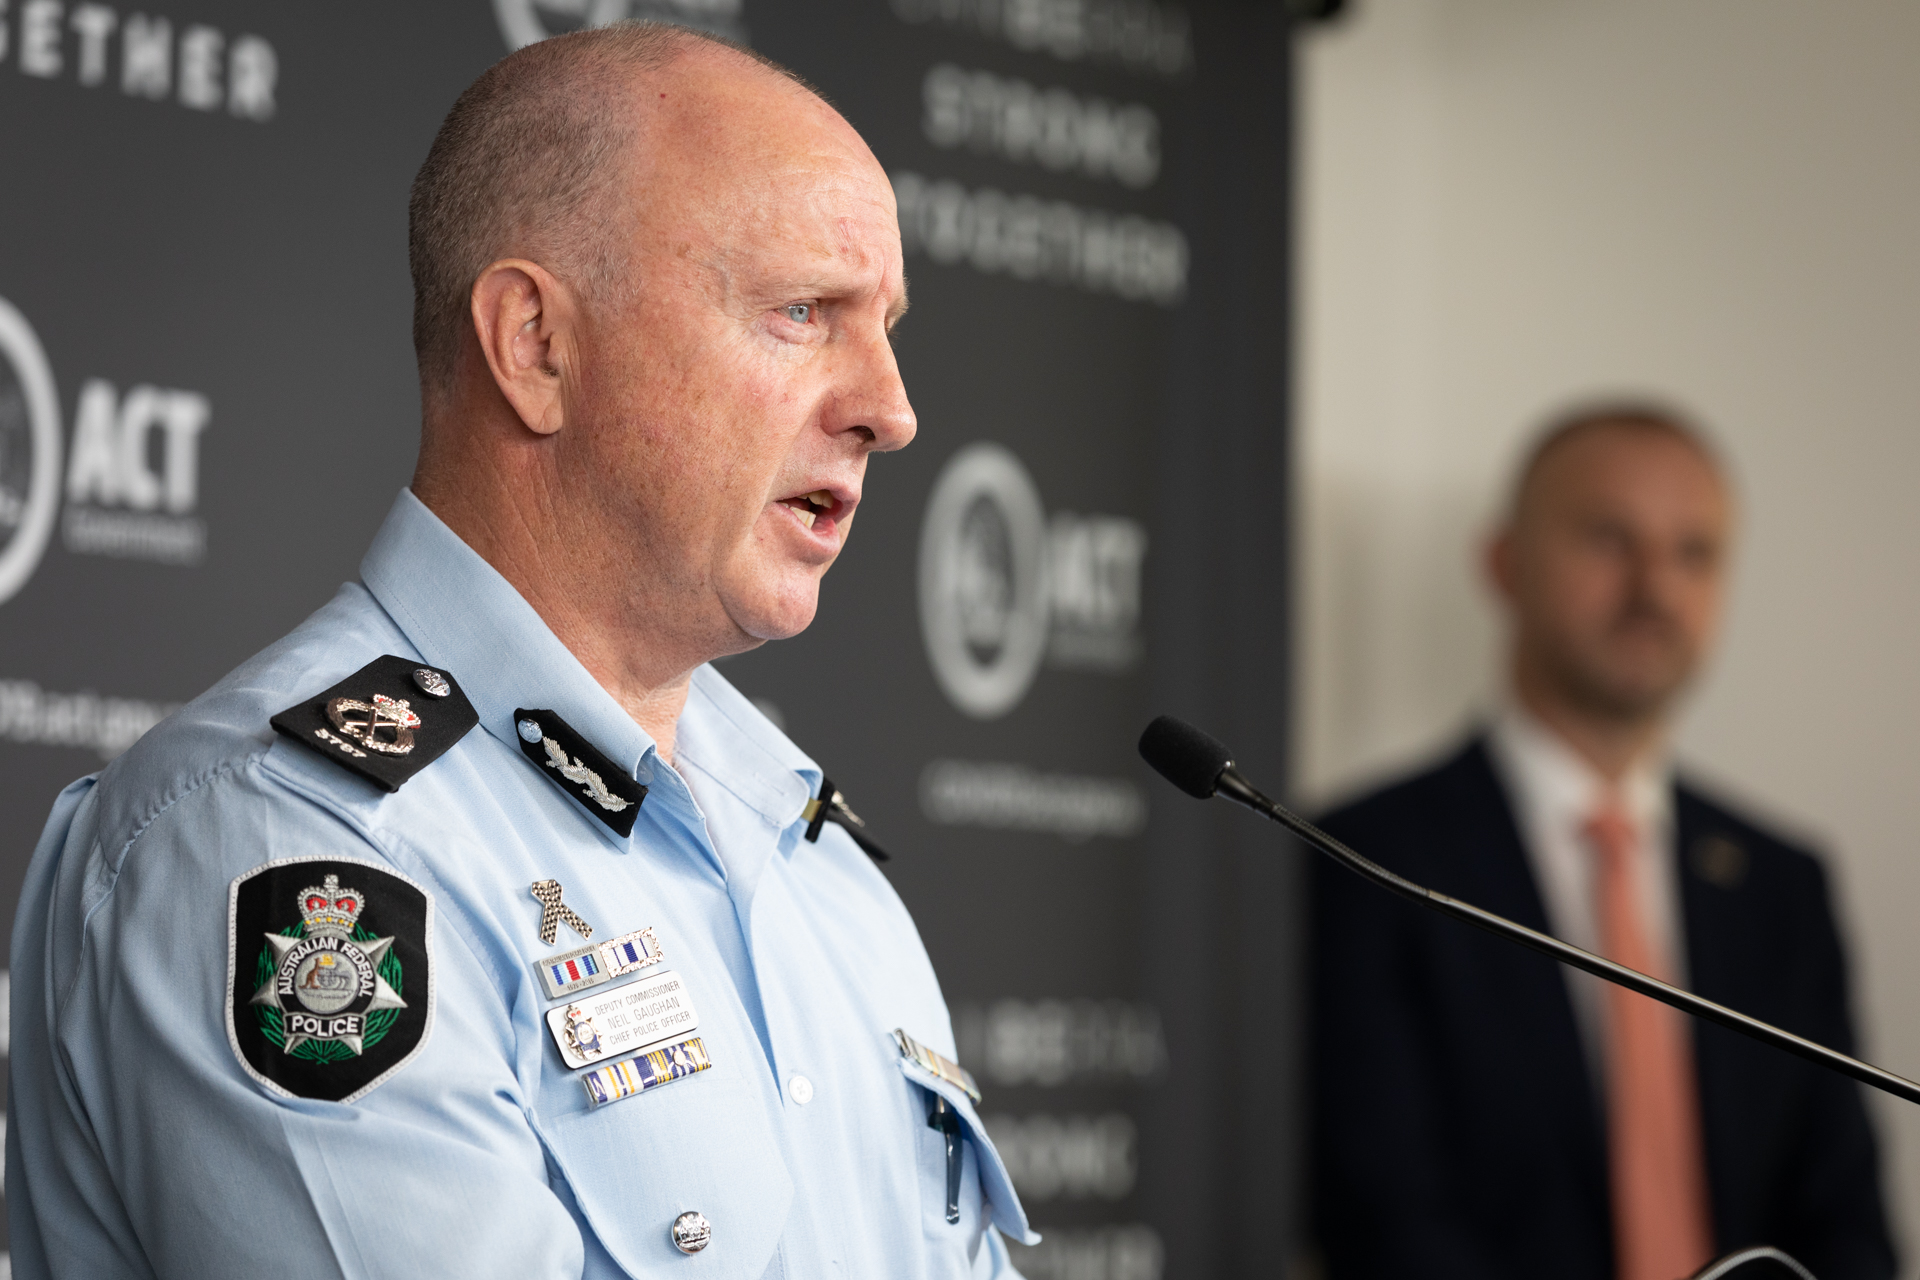 Police begin RBT-style quarantine checks for COVID-compliance